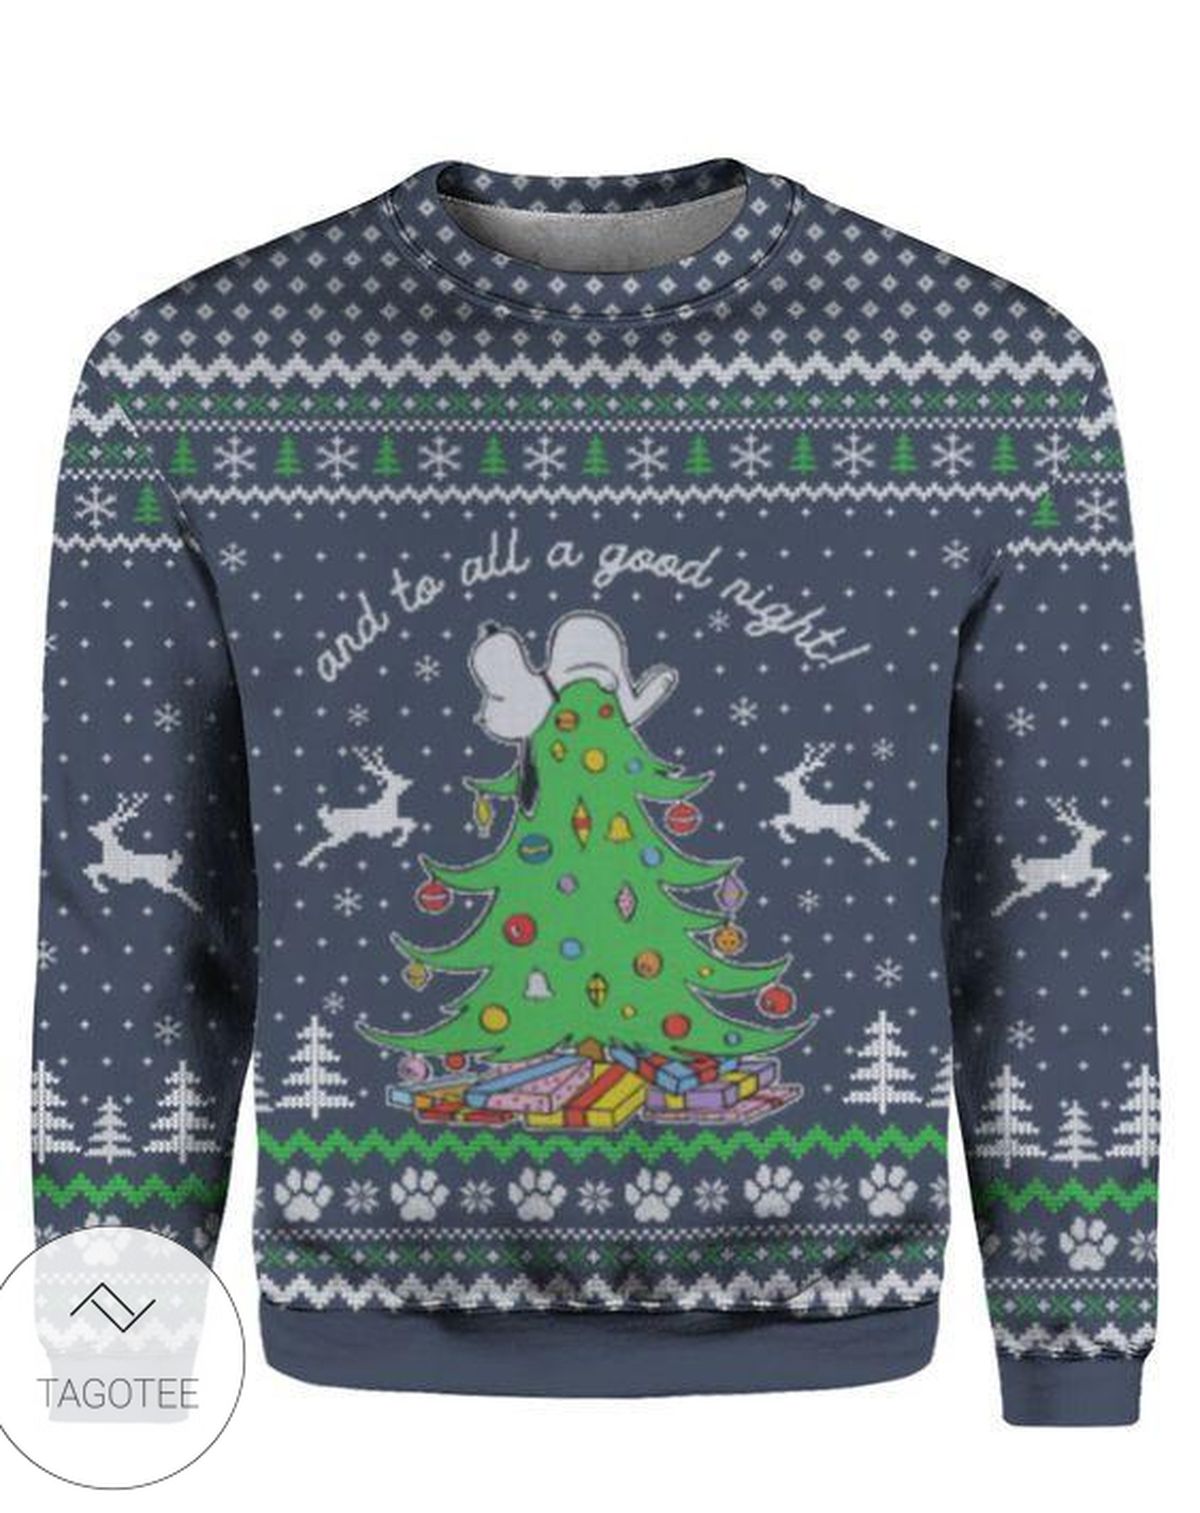 New 2021 To All A Good Night Ugly Christmas Sweater